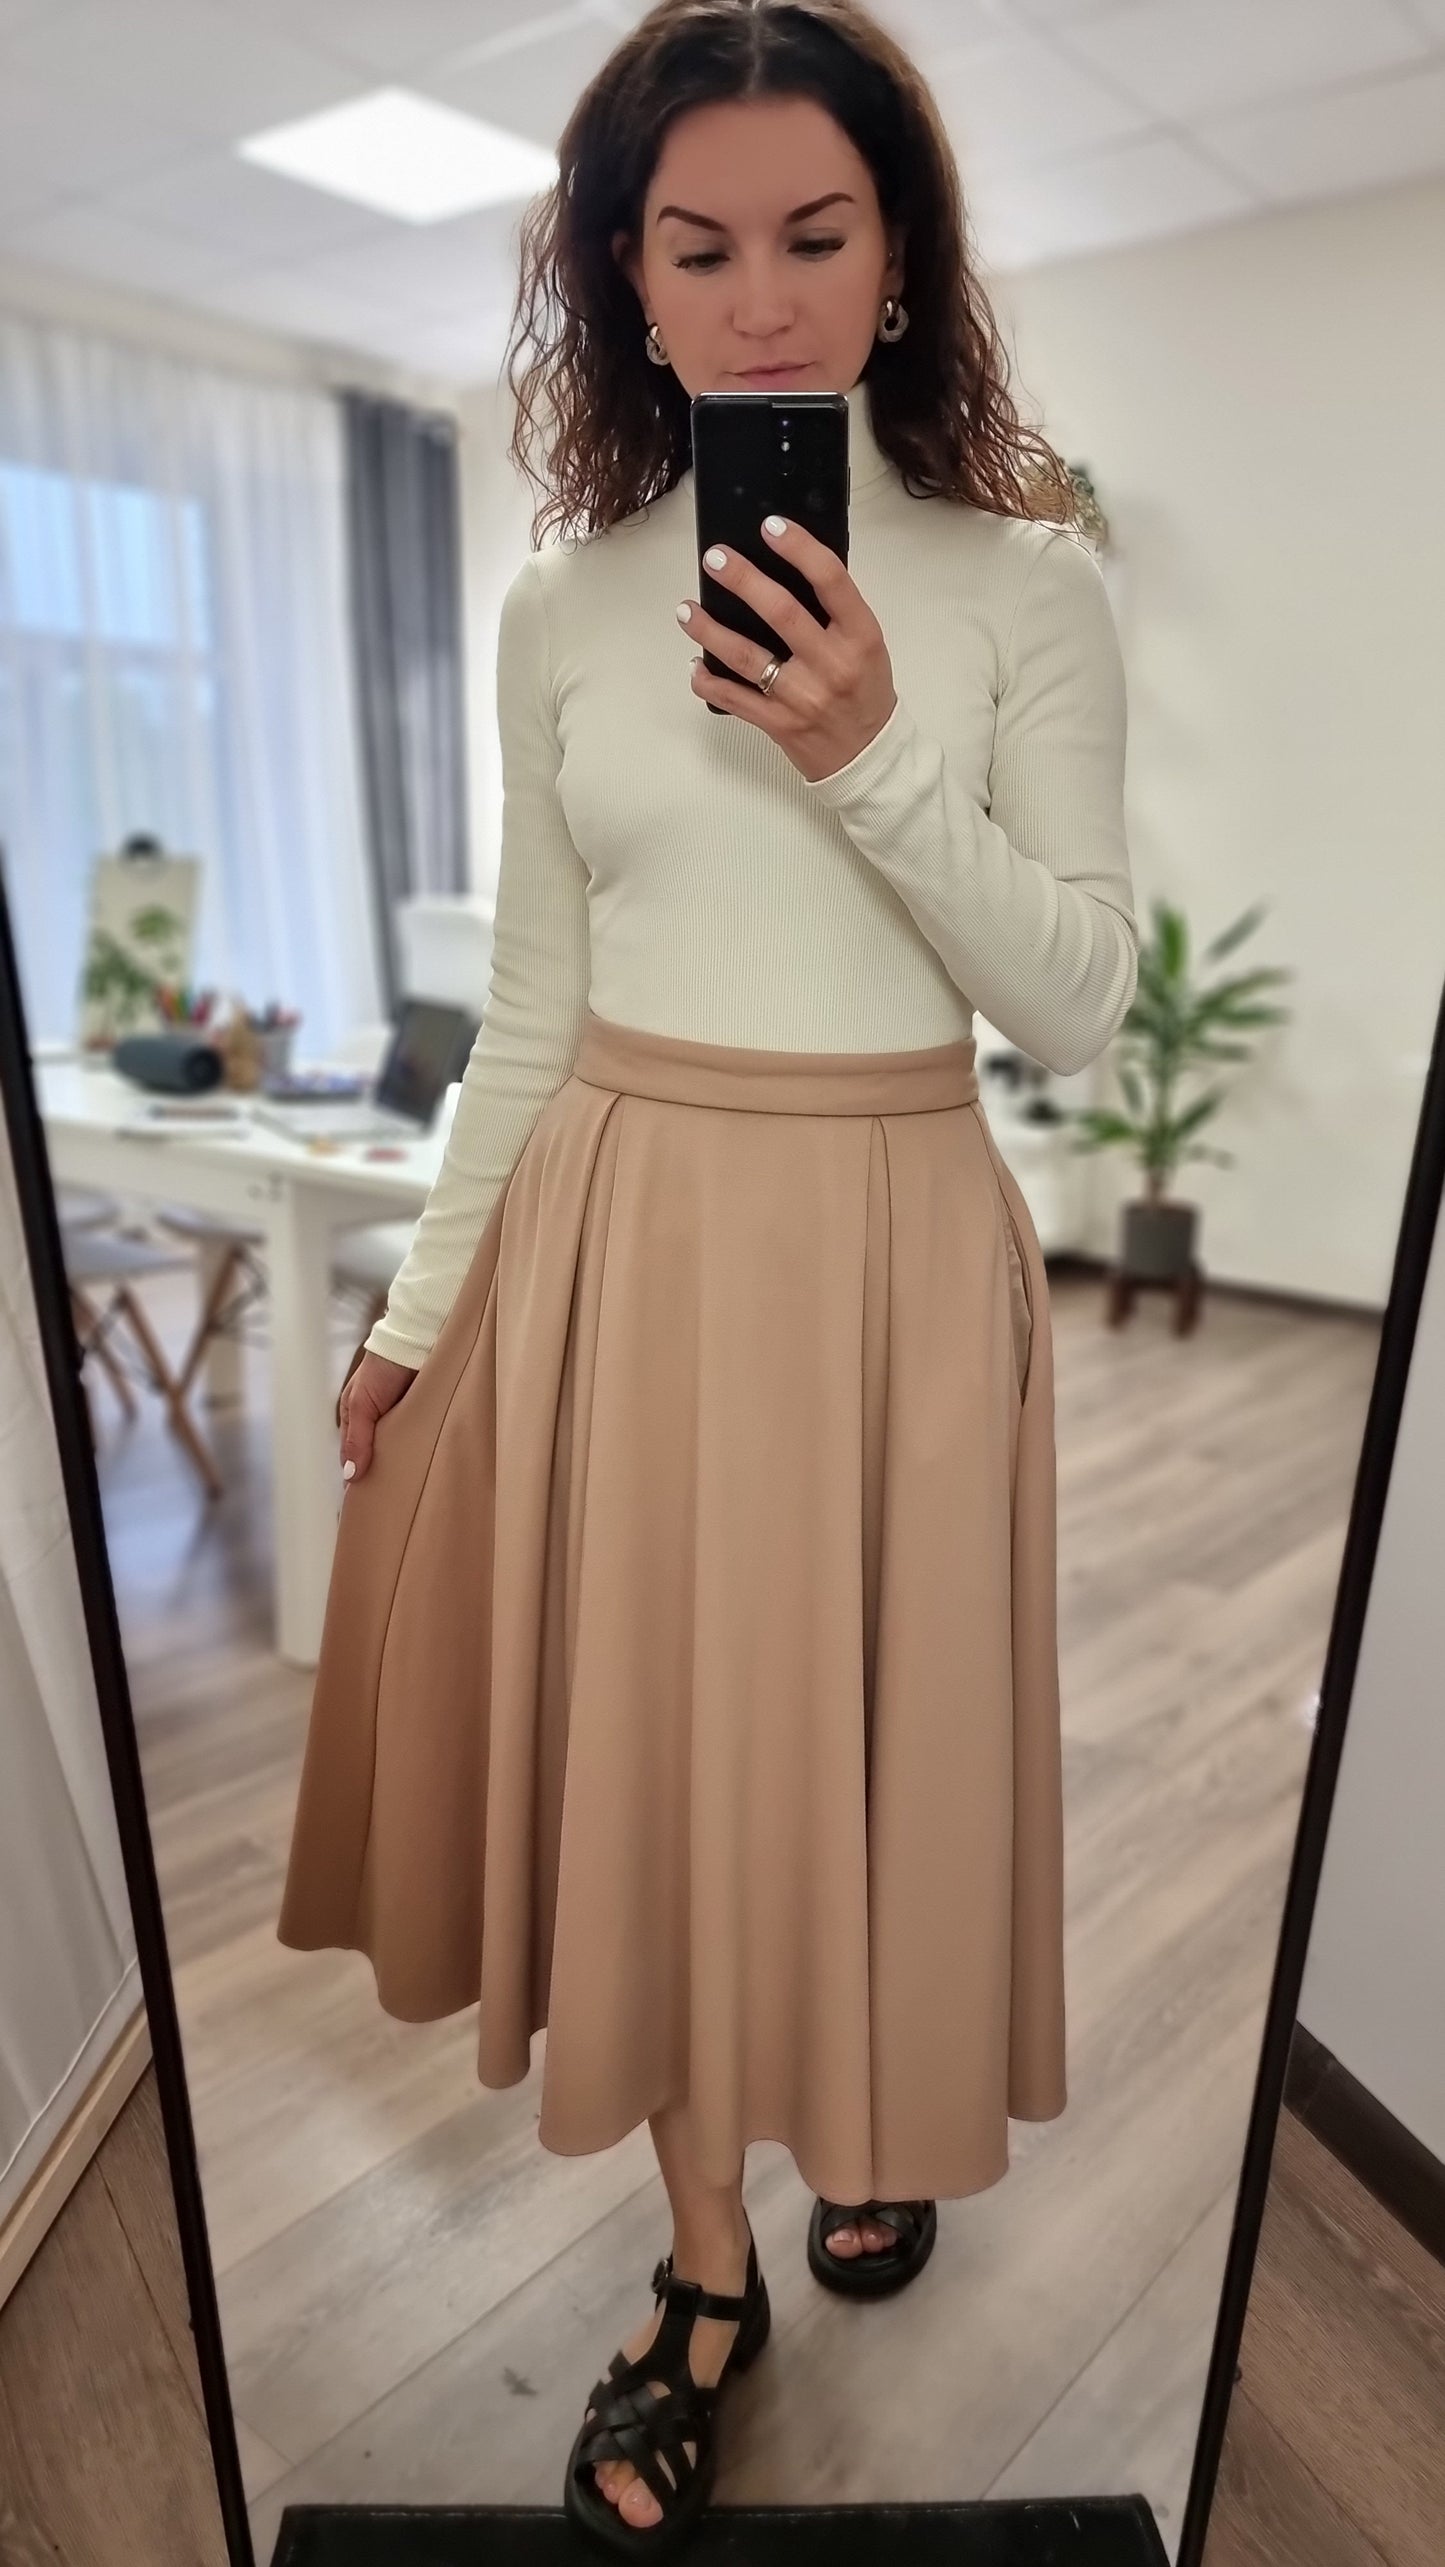 Sand beige A-lined skirt with pockets